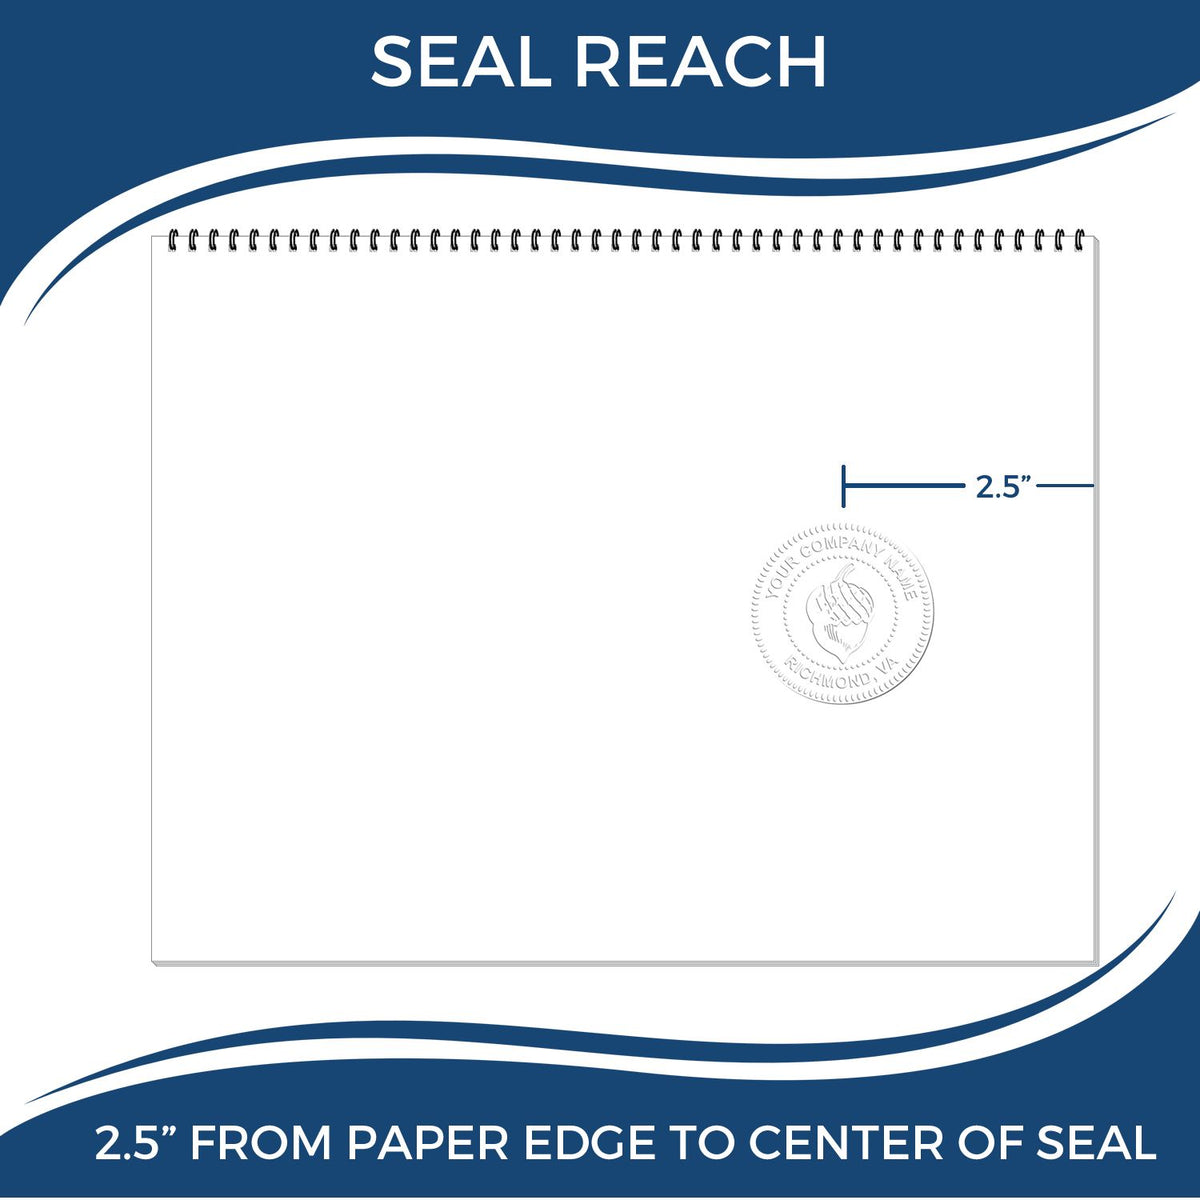 An infographic showing the seal reach which is represented by a ruler and a miniature seal image of the Long Reach Missouri Geology Seal